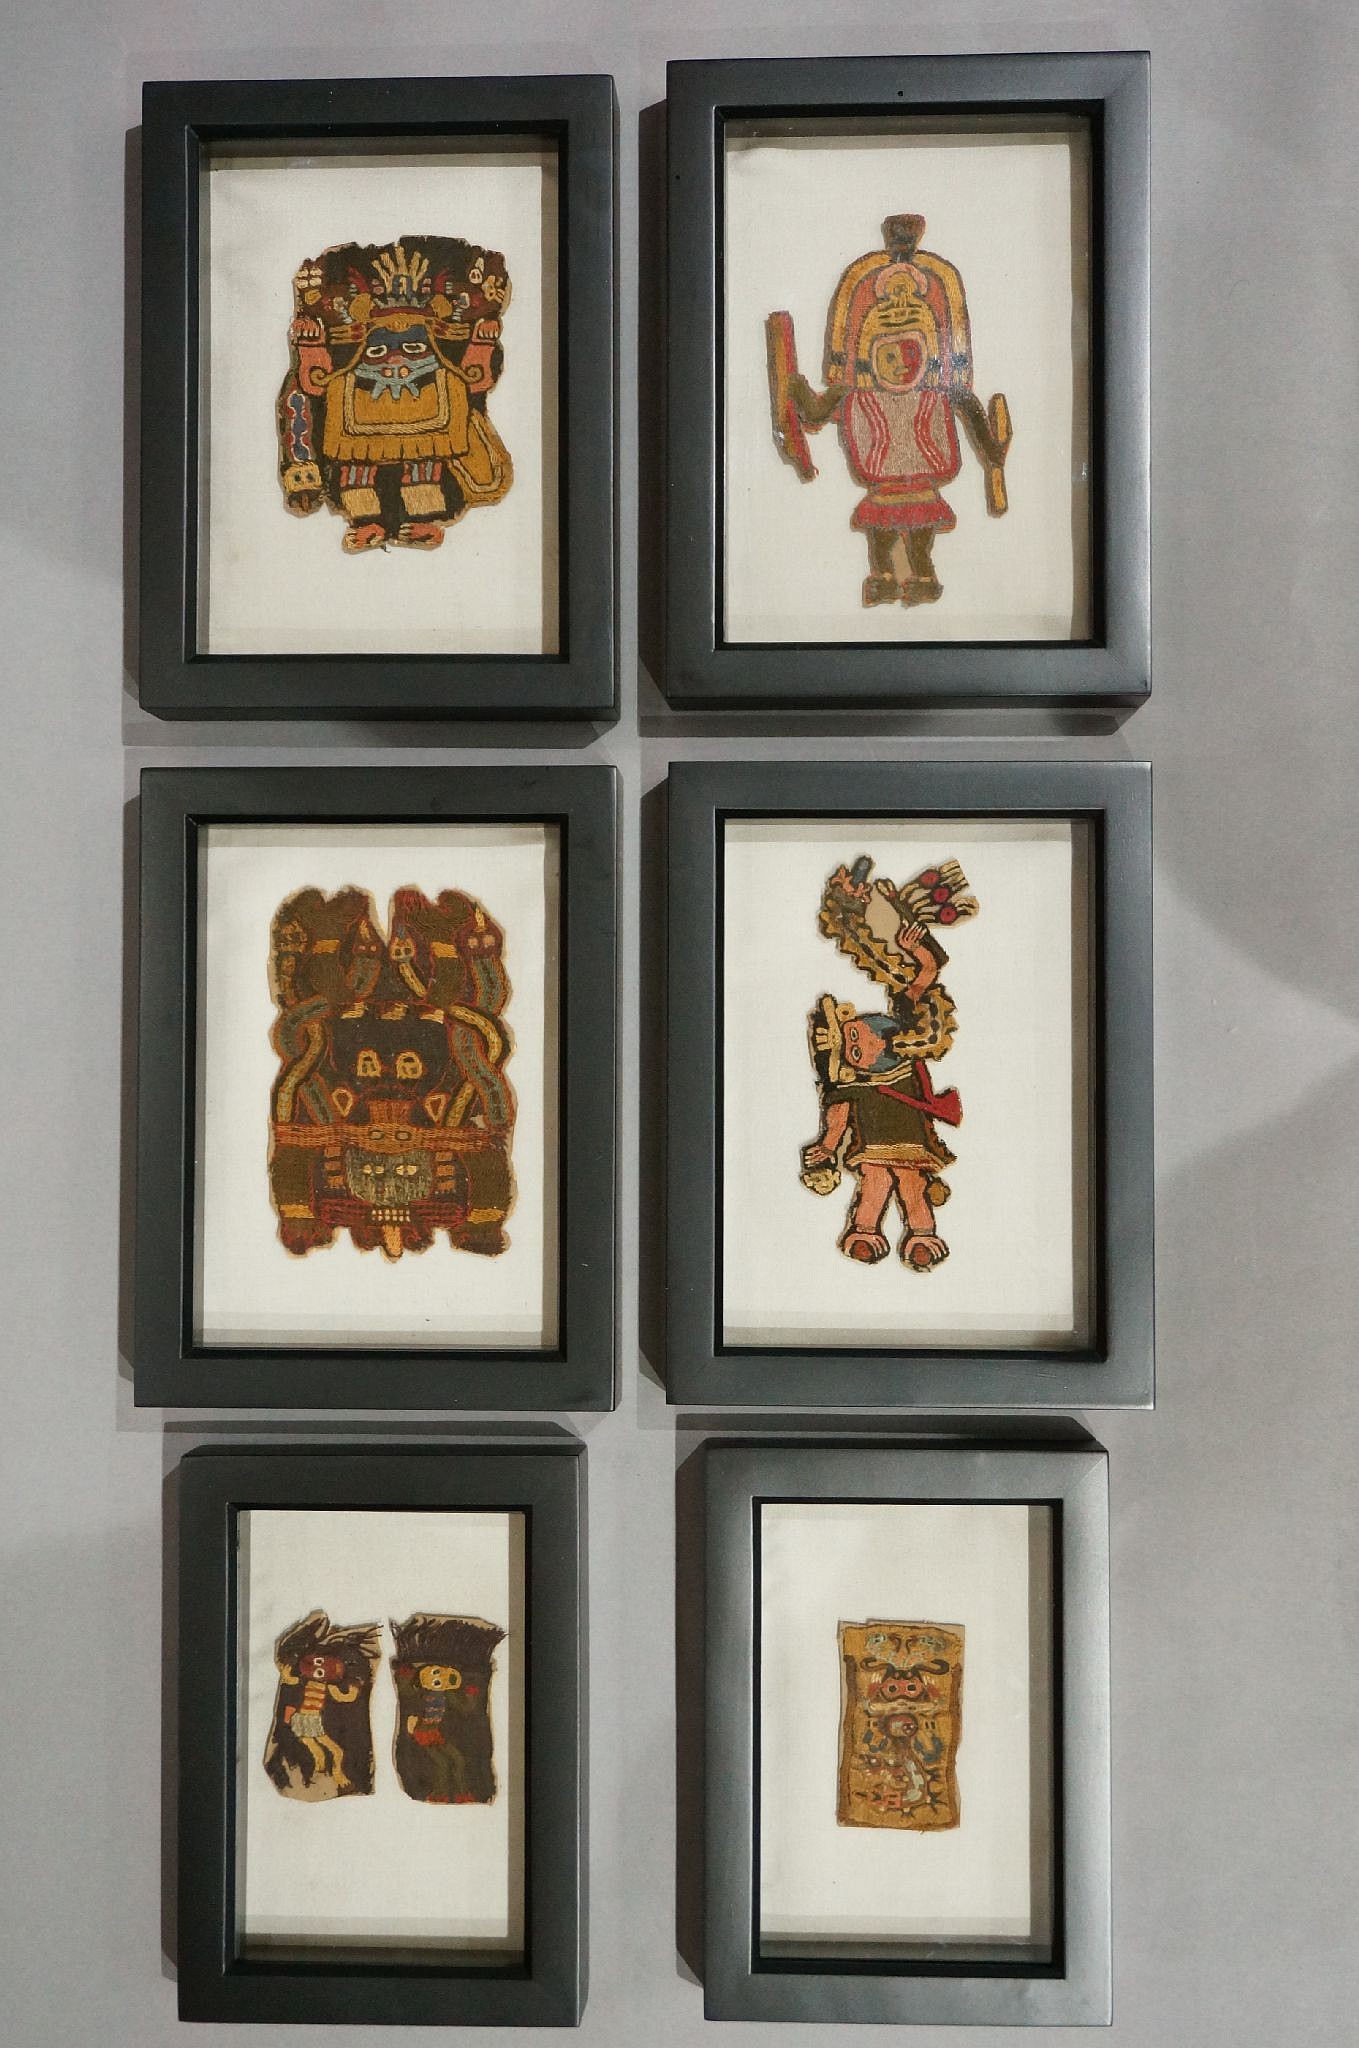 Peru, Paracas Embroidered Group of 6 Textile Sections
These figures represent different shamans in different states of transformation. The same subjects are illustrated in Alfredo Taullard’s Tejidos y Ponchos Indigenas de Sudamérica, Buenos Aires: Editorial Guillermo Kraft Limitada, 1949.  These Paracas sections were excavated in the 1920s and were sent to various museum collections in Europe and the US.
Mounted on cardboard backing and reframed.
Acquired by David Bernstein in 2019. Period: Peru, Paracas, South Coast, c. 200 - 100 BC

Media: Textile
Dimensions: Length varies from 3 to 4 inches.
$12,000
n9048